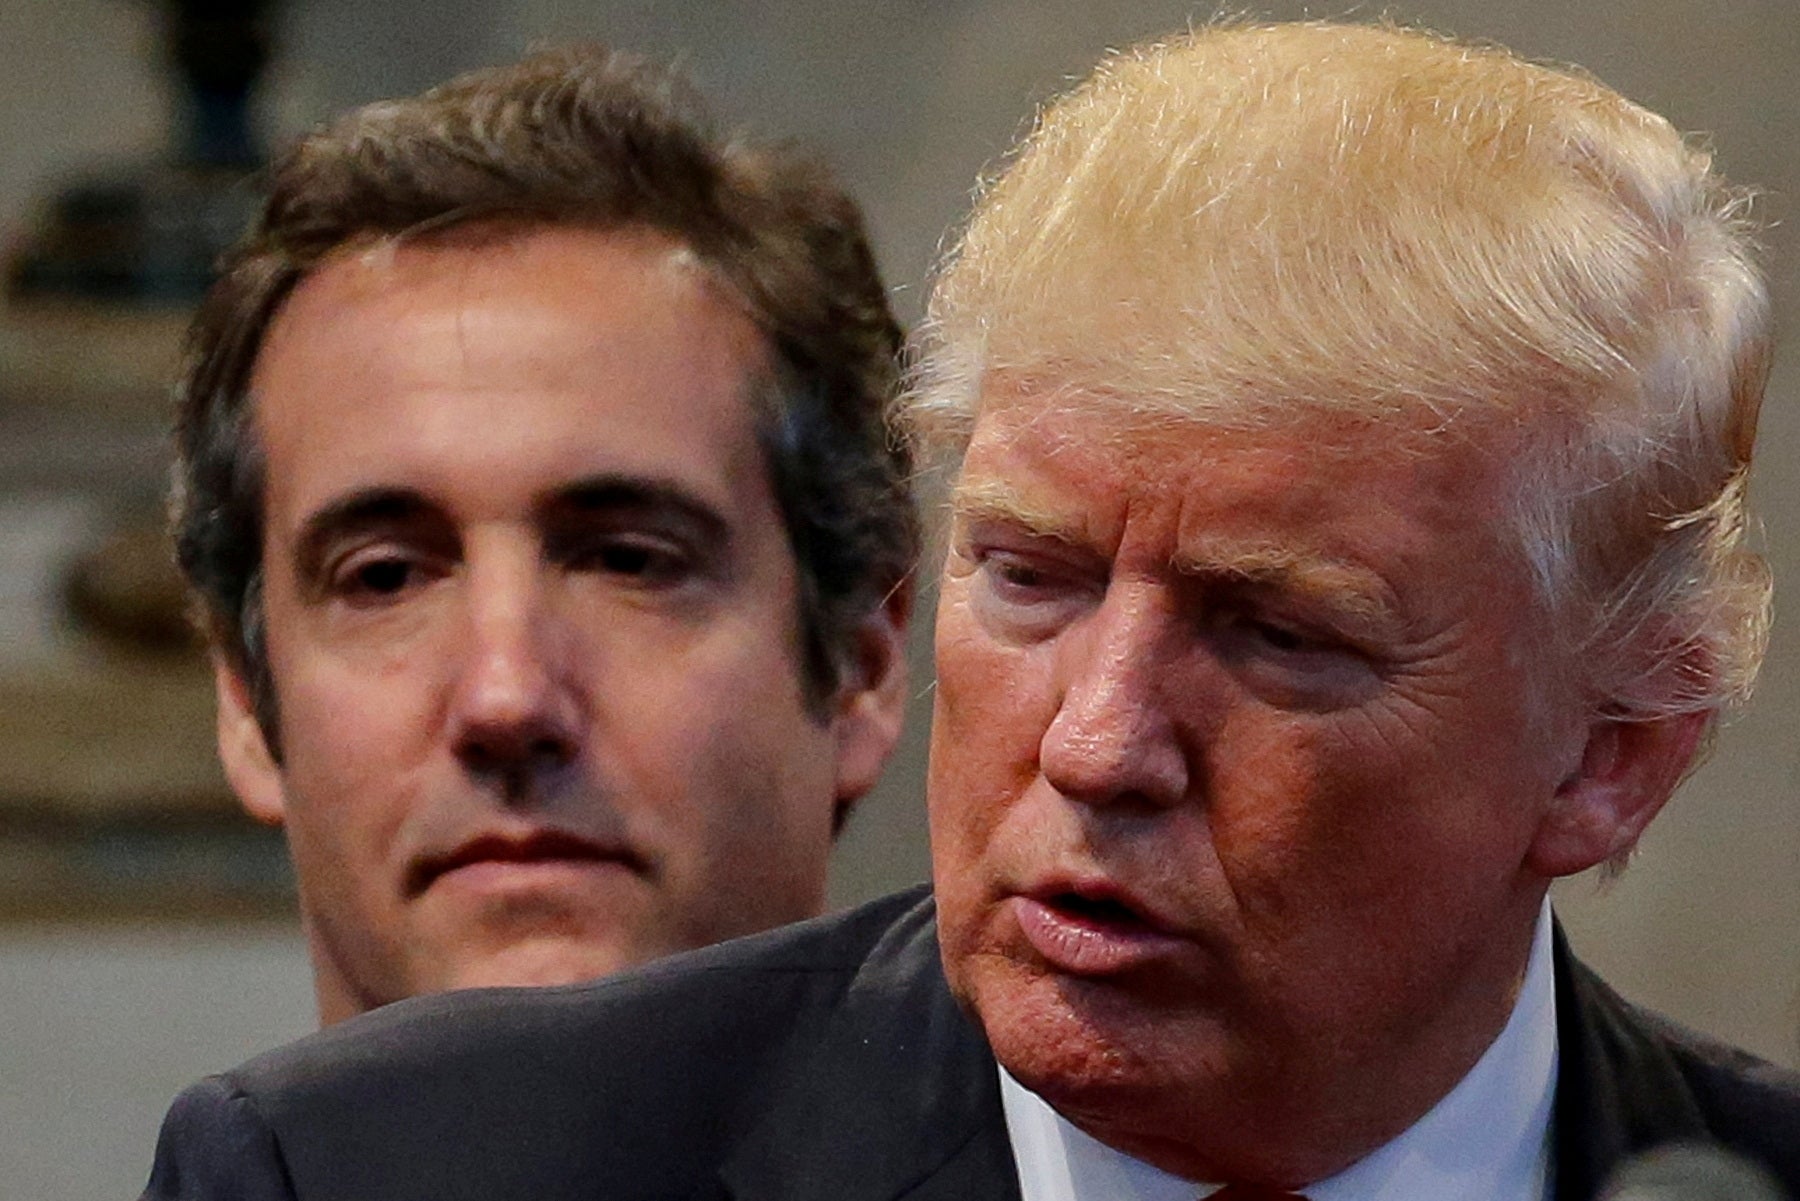 Michael Cohen pictured with Donald Trump at a campaign stop in Ohio ahead of the 2016 presidential election. The pair have since been reunited at Mr Trump’s criminal trial in Manhattan